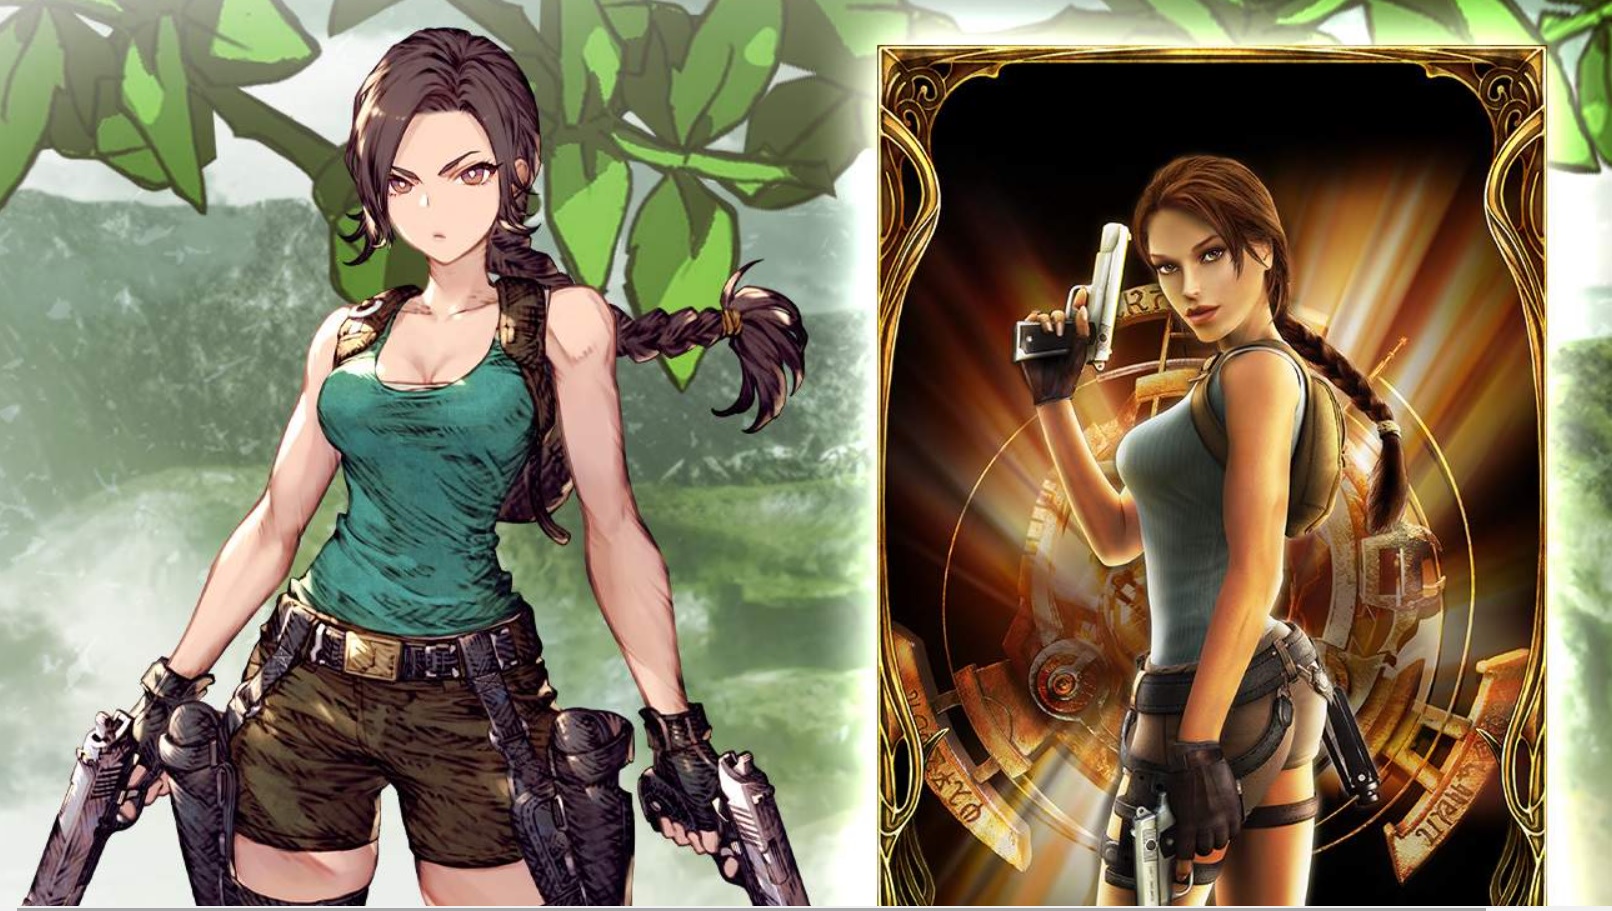 Square Enix Sells Tomb Raider IP and More for 300M to Focus on